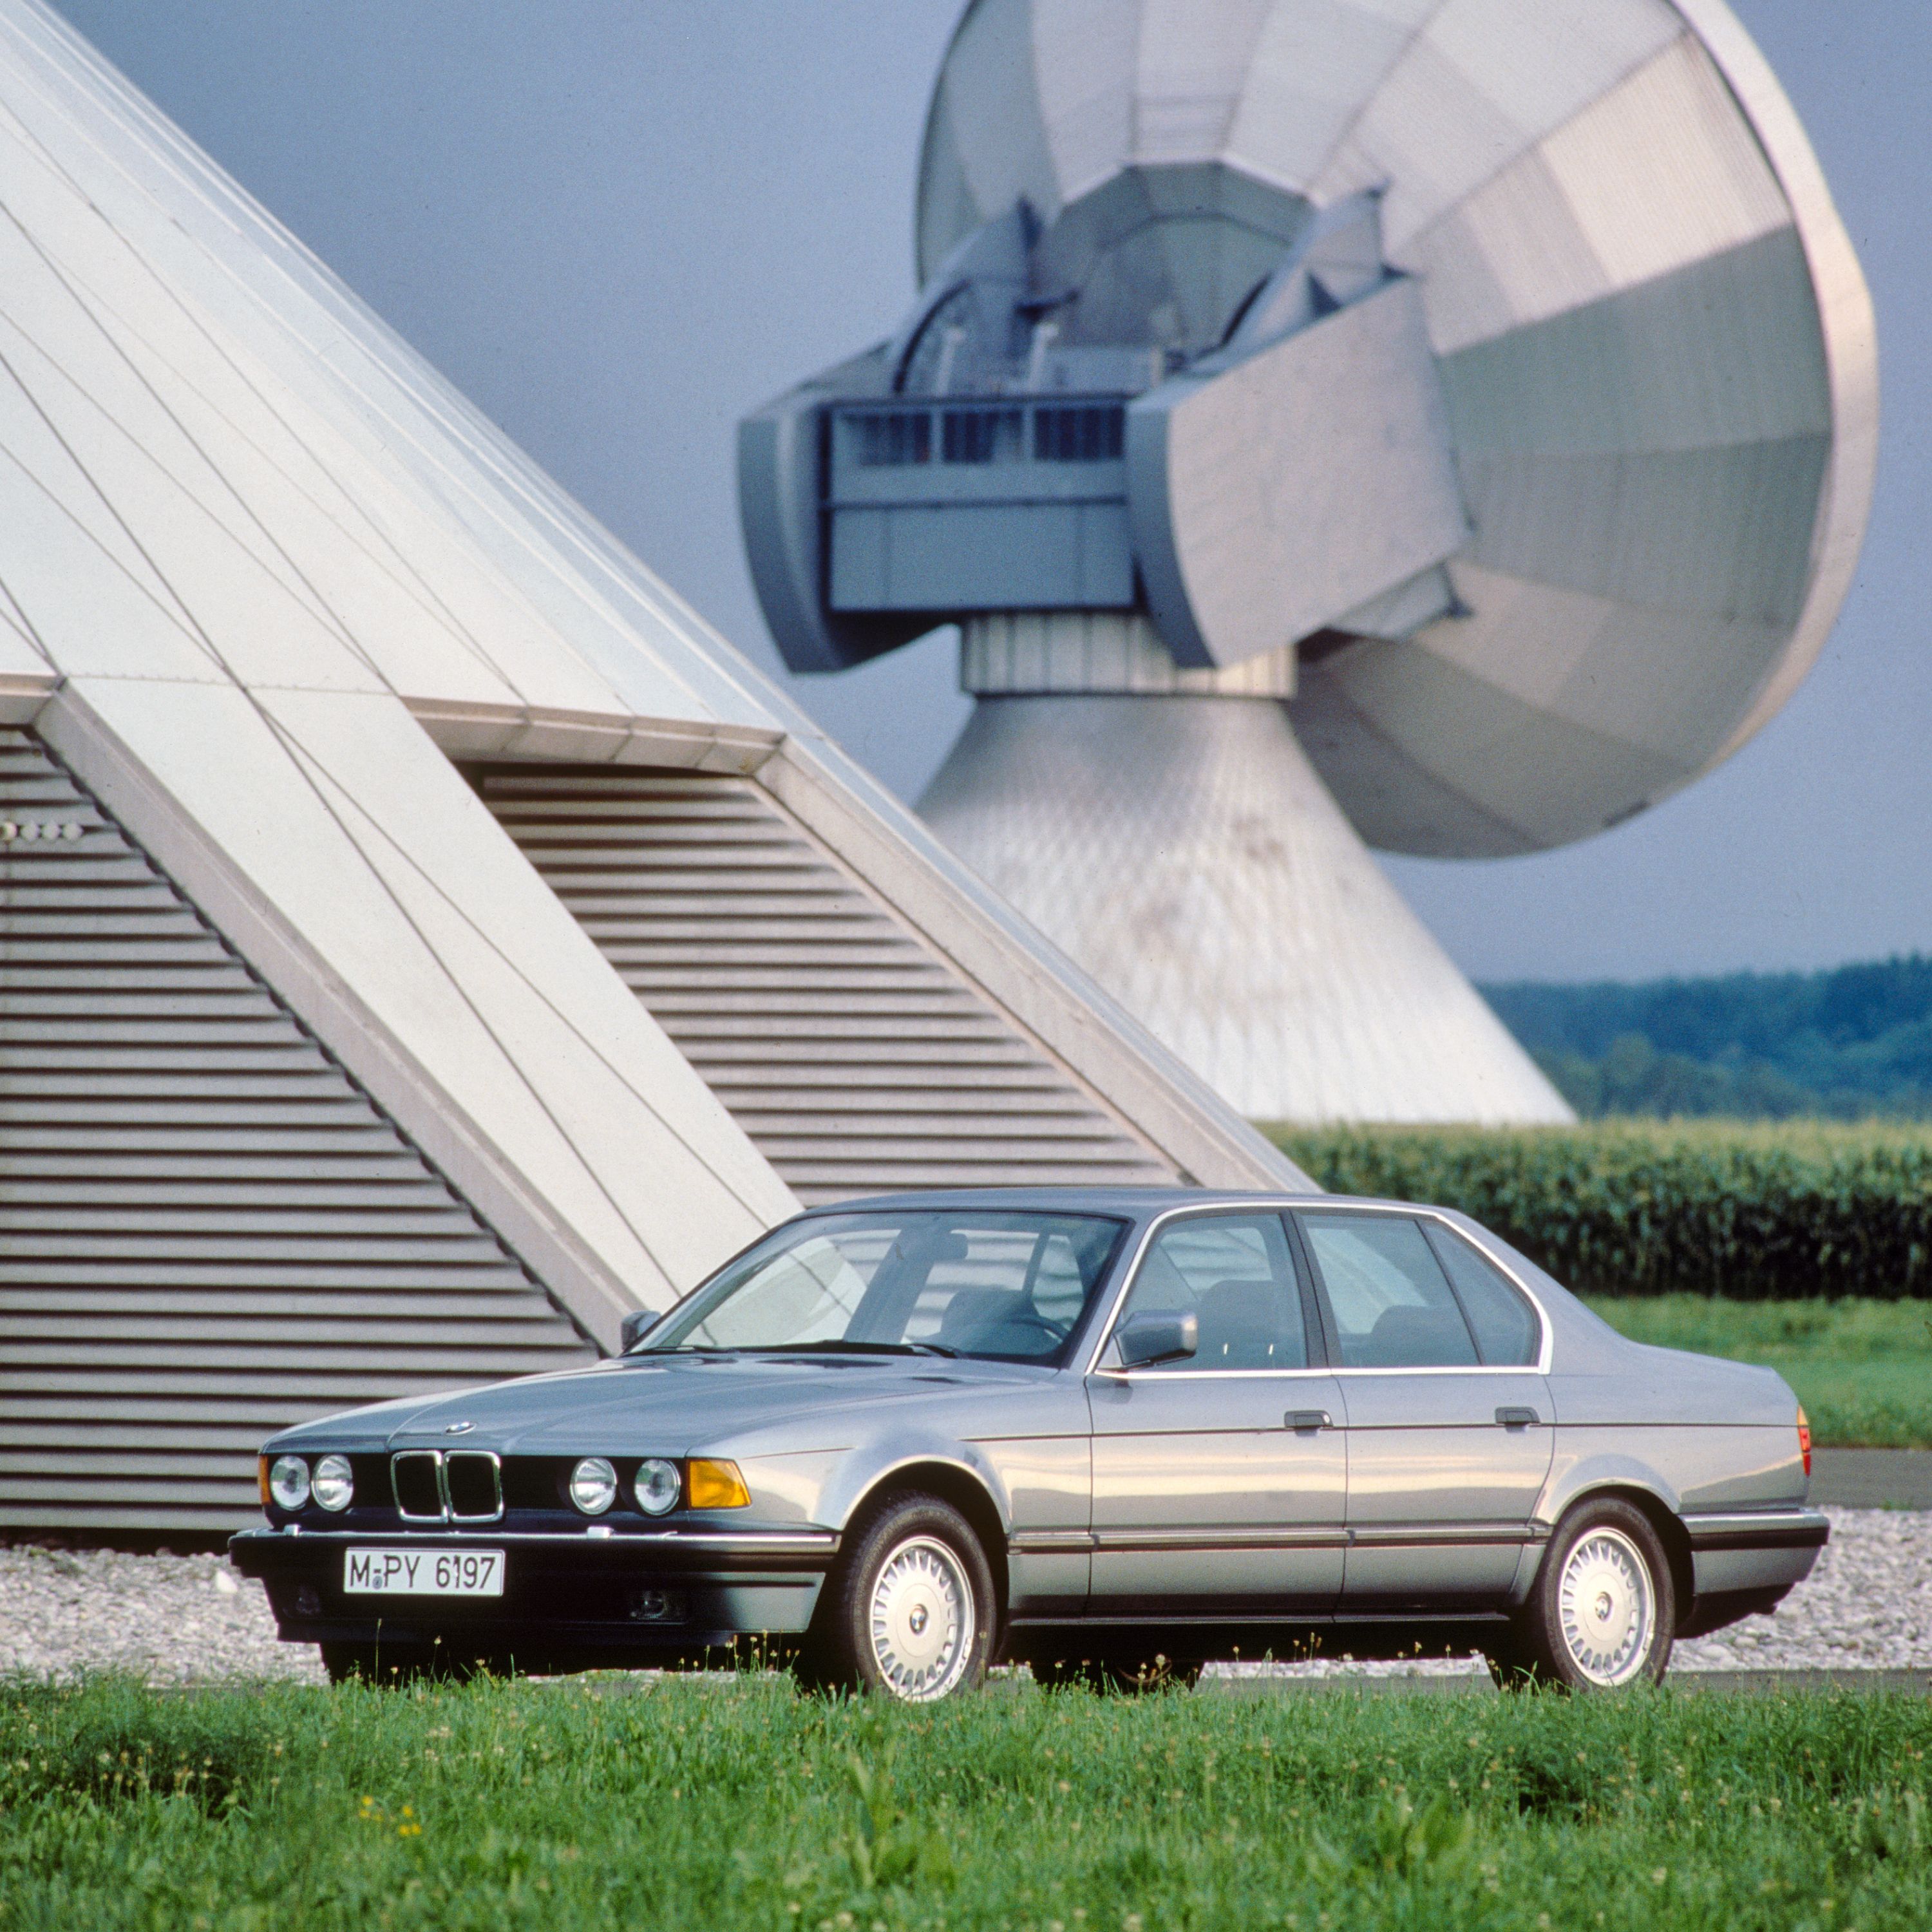 BMW 7 Series Sedan E32 in an agricultural environment surrounded by fields and agricultural facilities